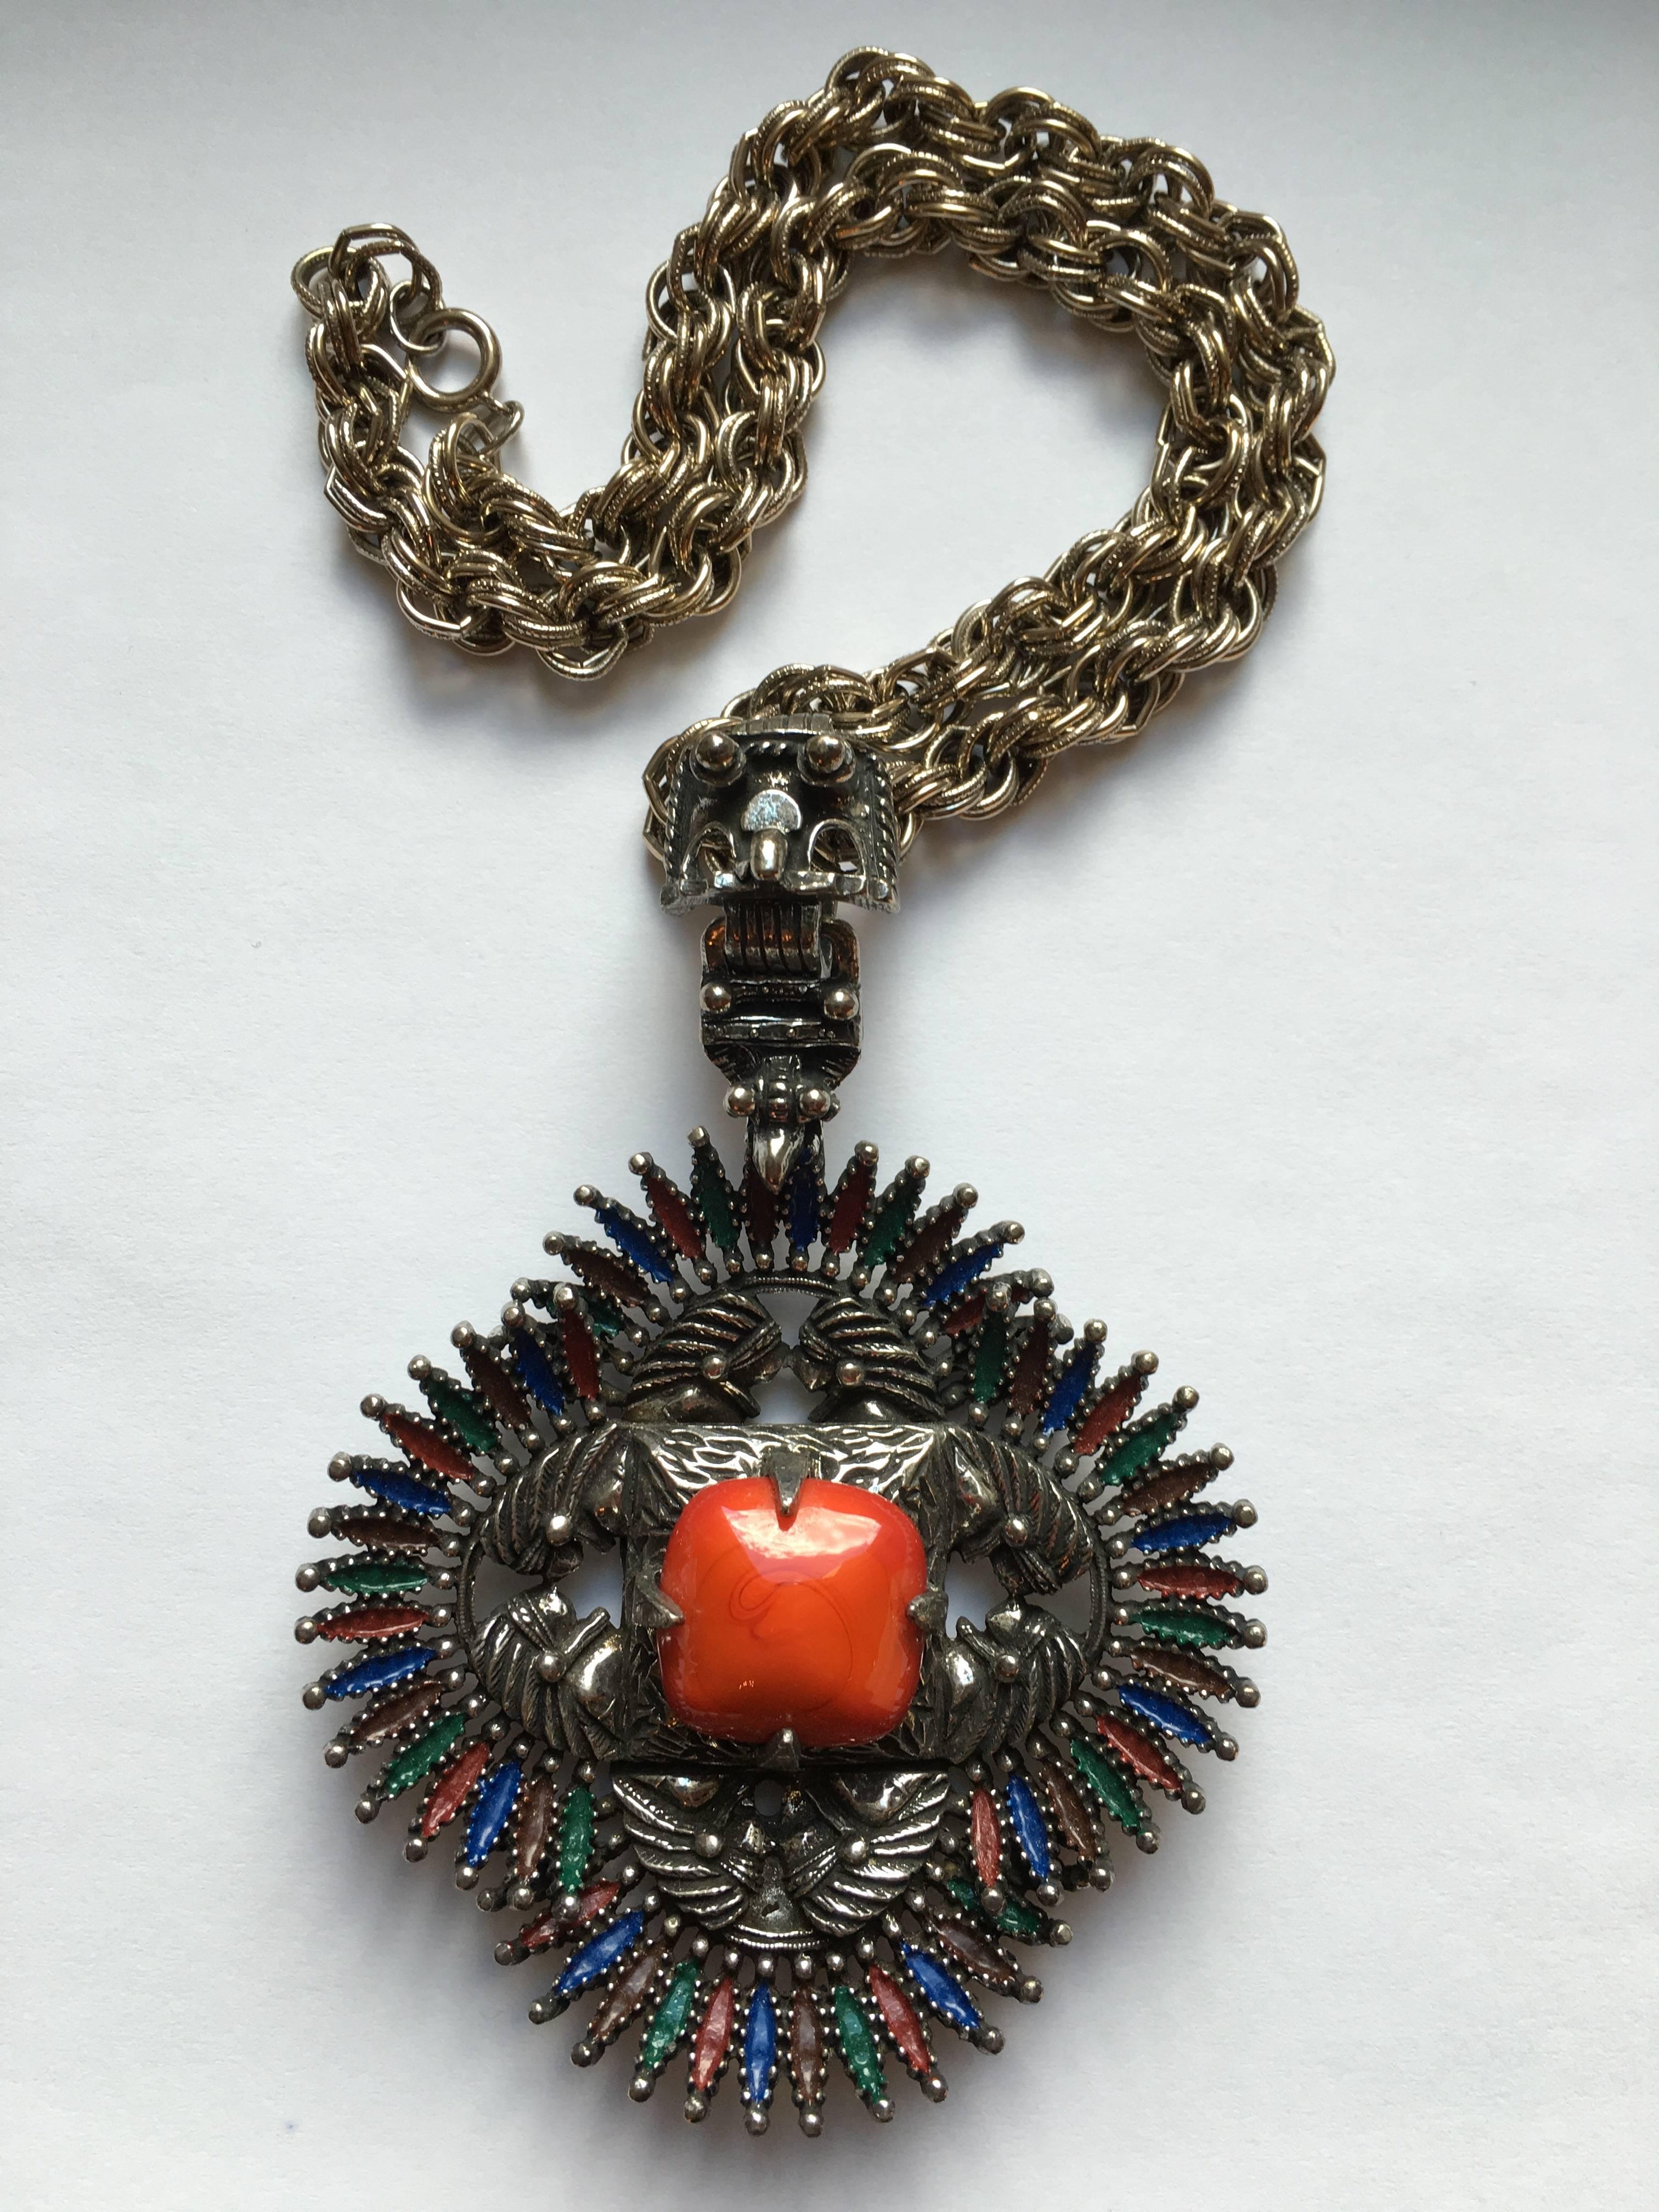 This silvertone pendant necklace was created for Castlecliff in 1973 by the jewelry designer, Larry VRBA. Its pendant is large measuring 3" wide by 4 3/8" long which includes the 1 3/8" long bale. The pendant appears to be an